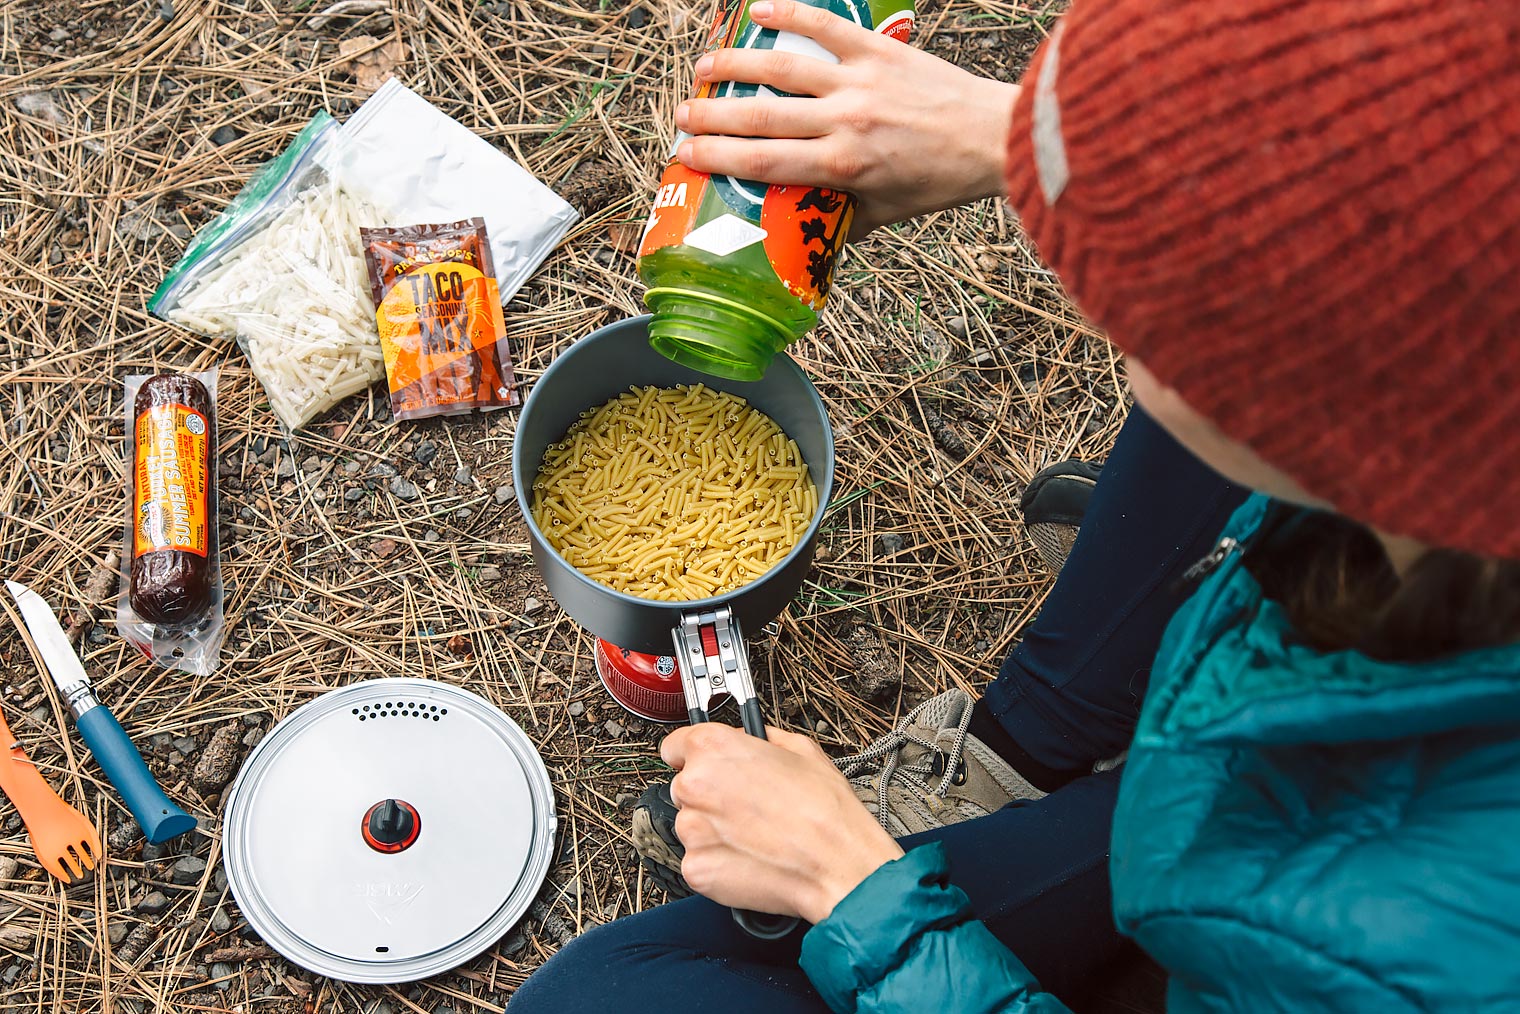 20+ Simple Backpacking Meal Ideas using items from Trader Joe's